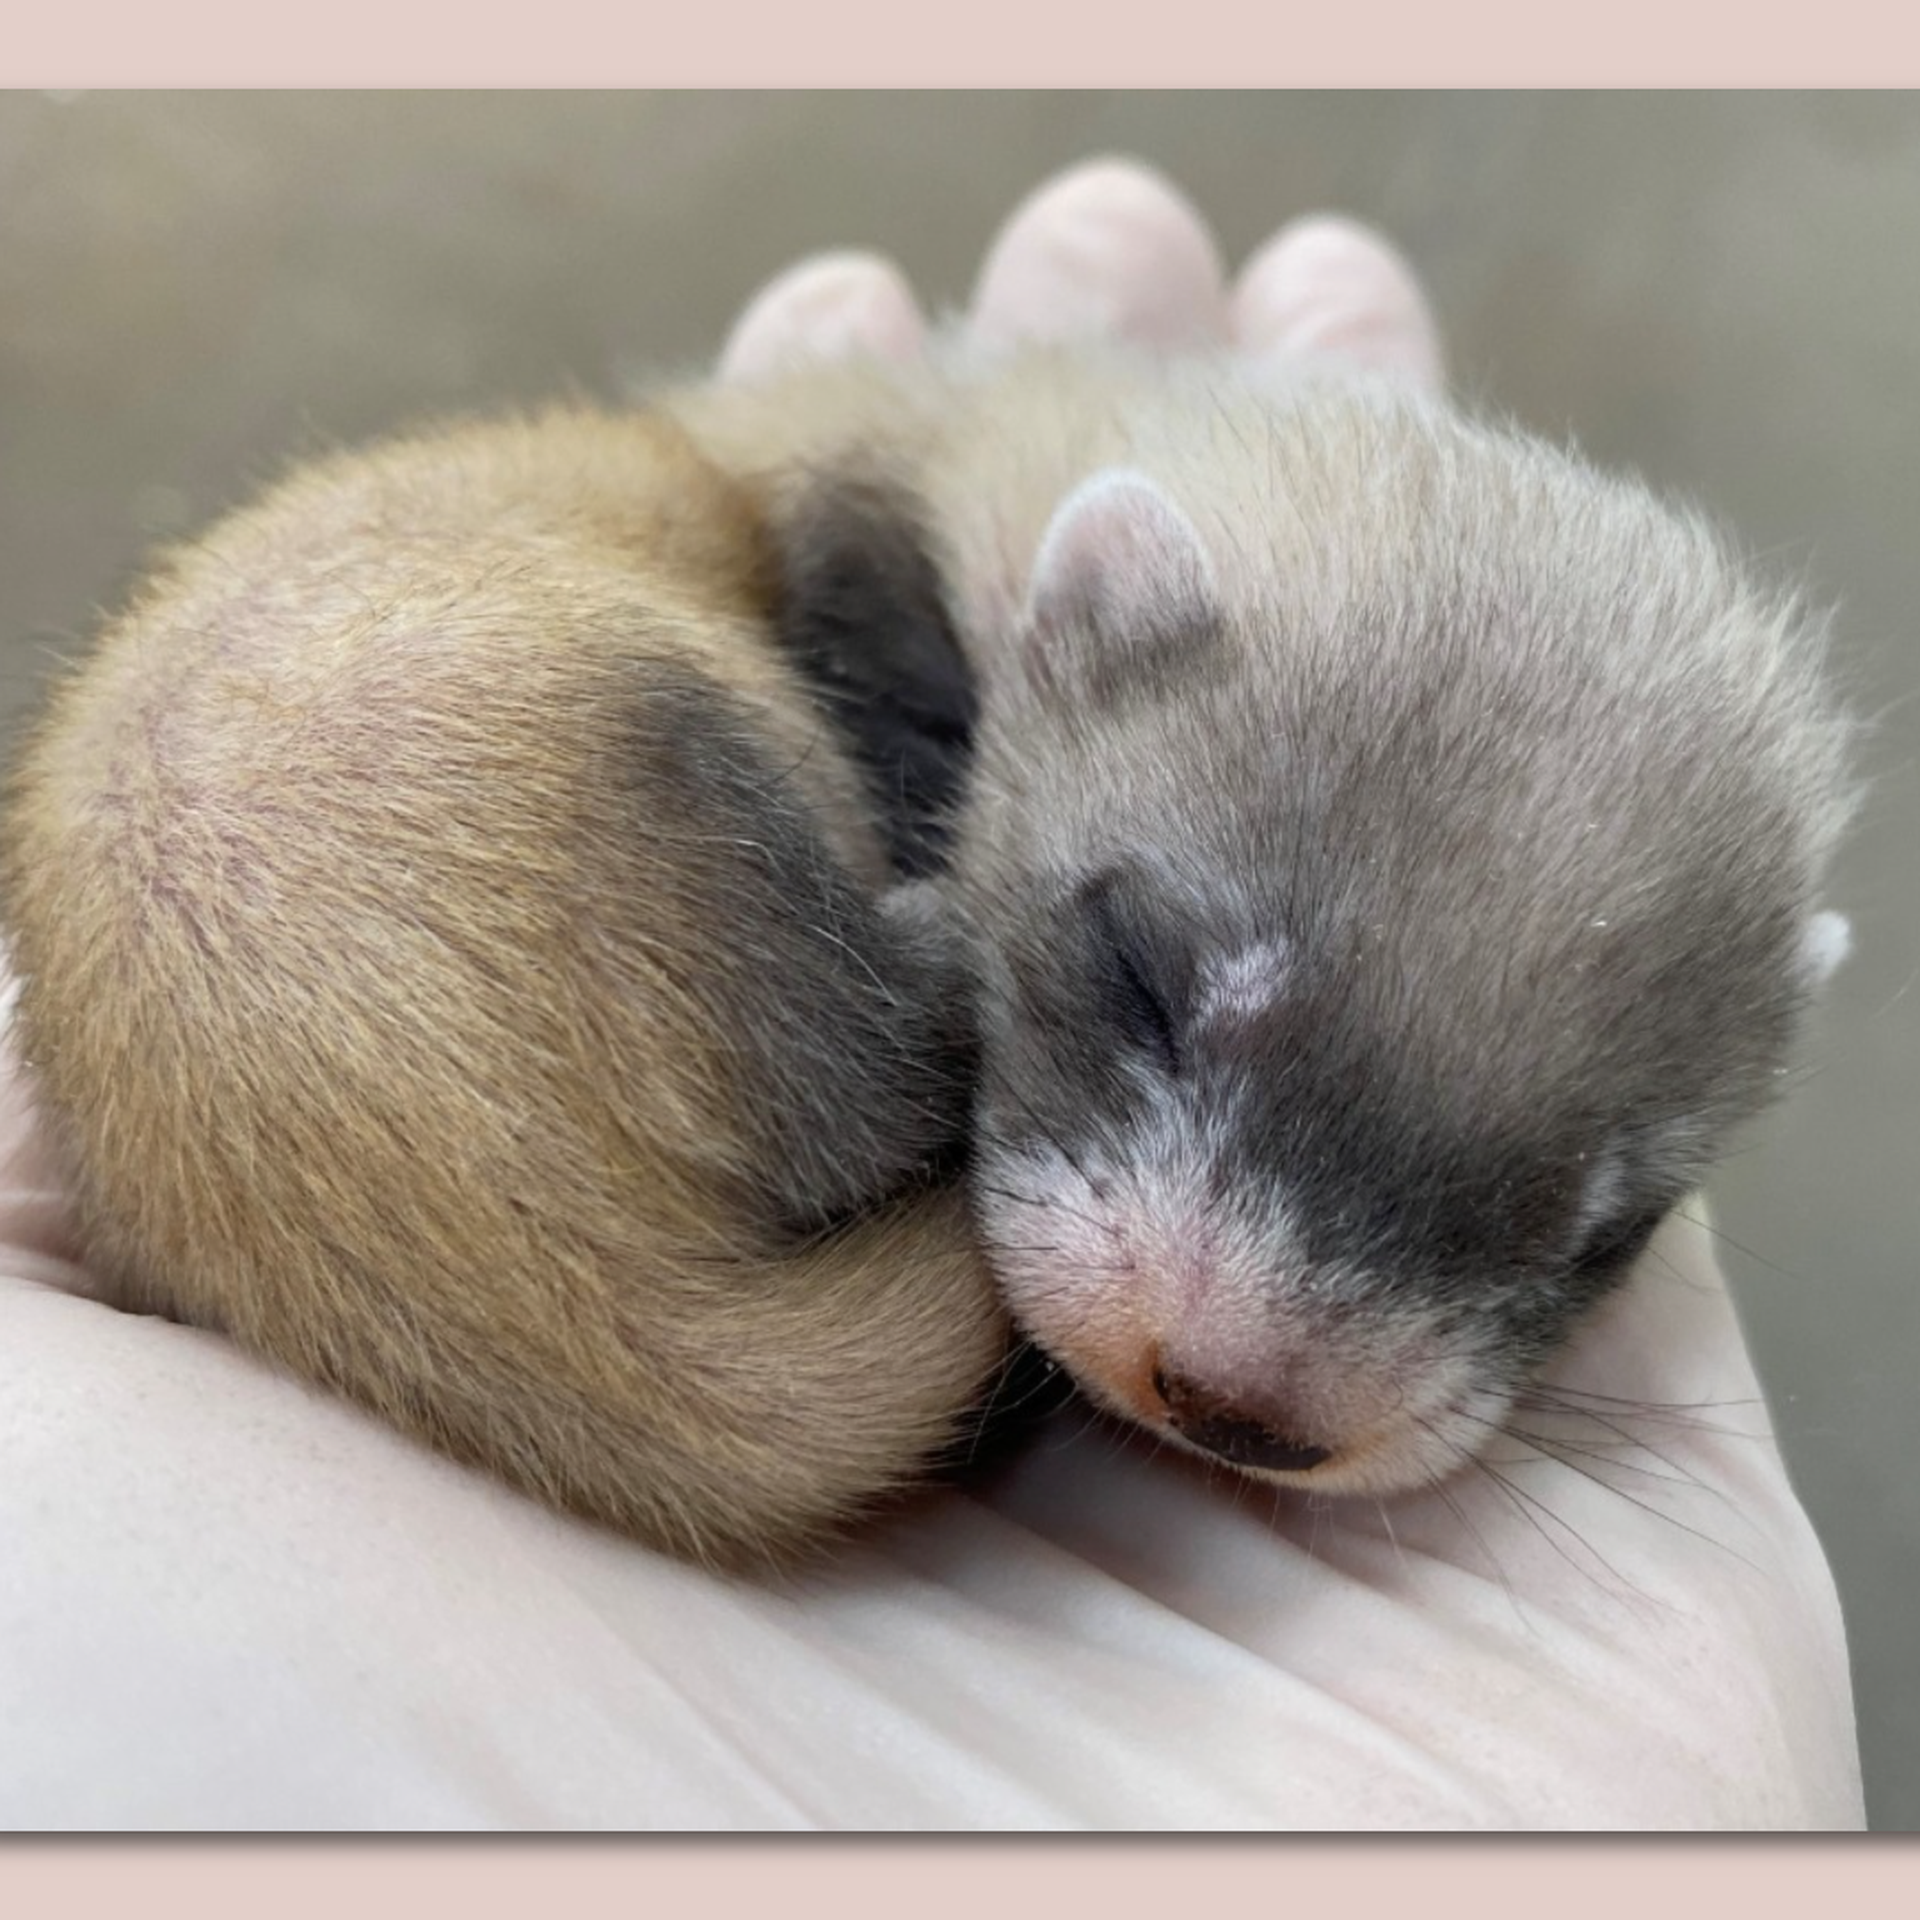 A black-footed ferret kit sleeping in the palm of a hand.